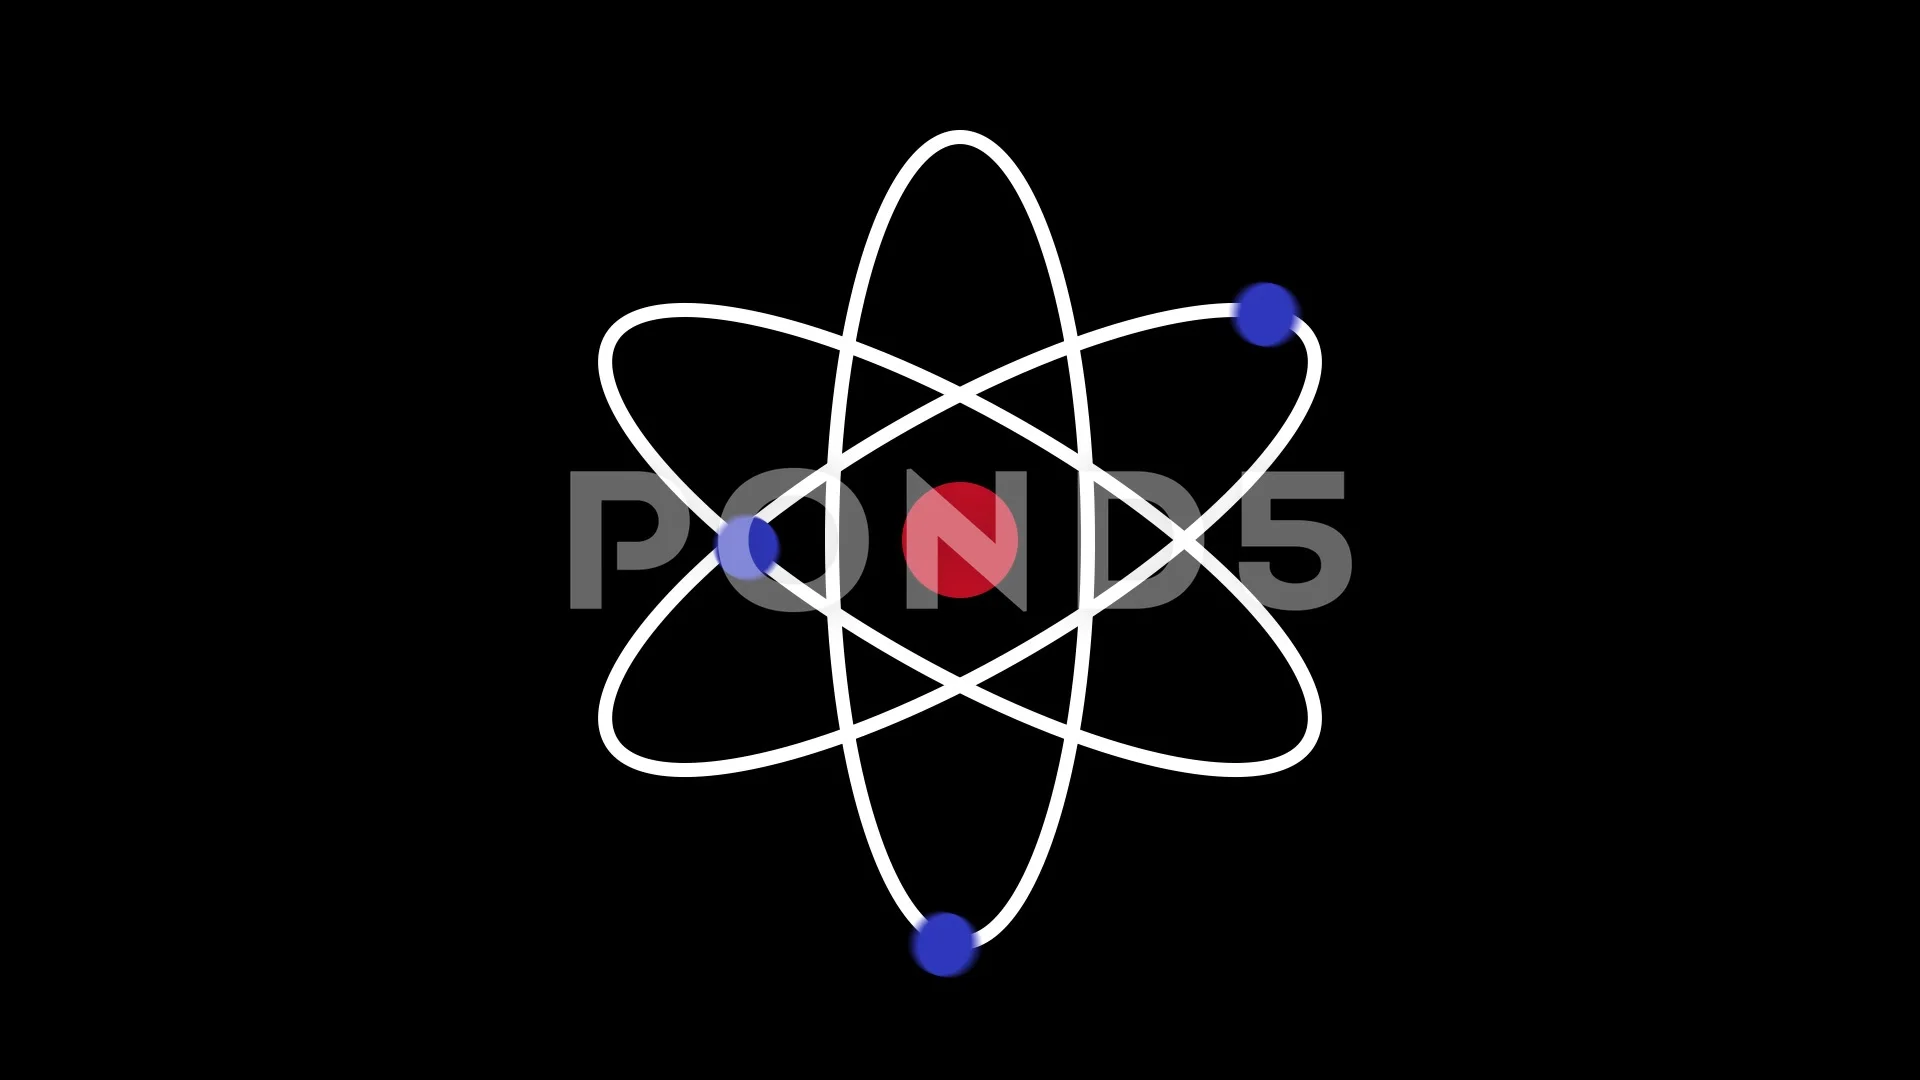 atomic structure animation